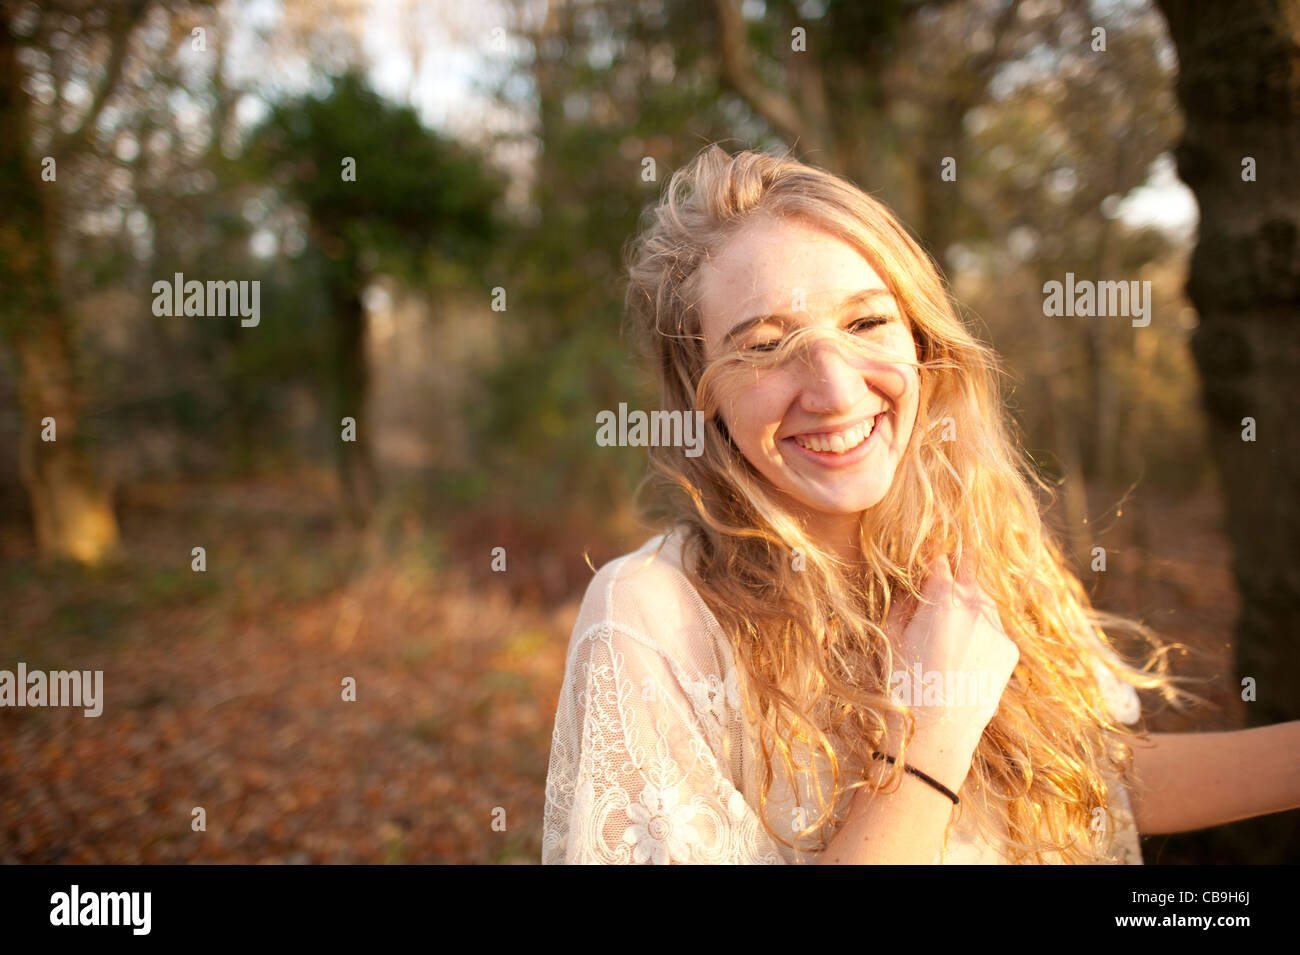 a happy smiling slim blonde woman girl alone in woodland autumn afternoon daytime UK Stock Photo